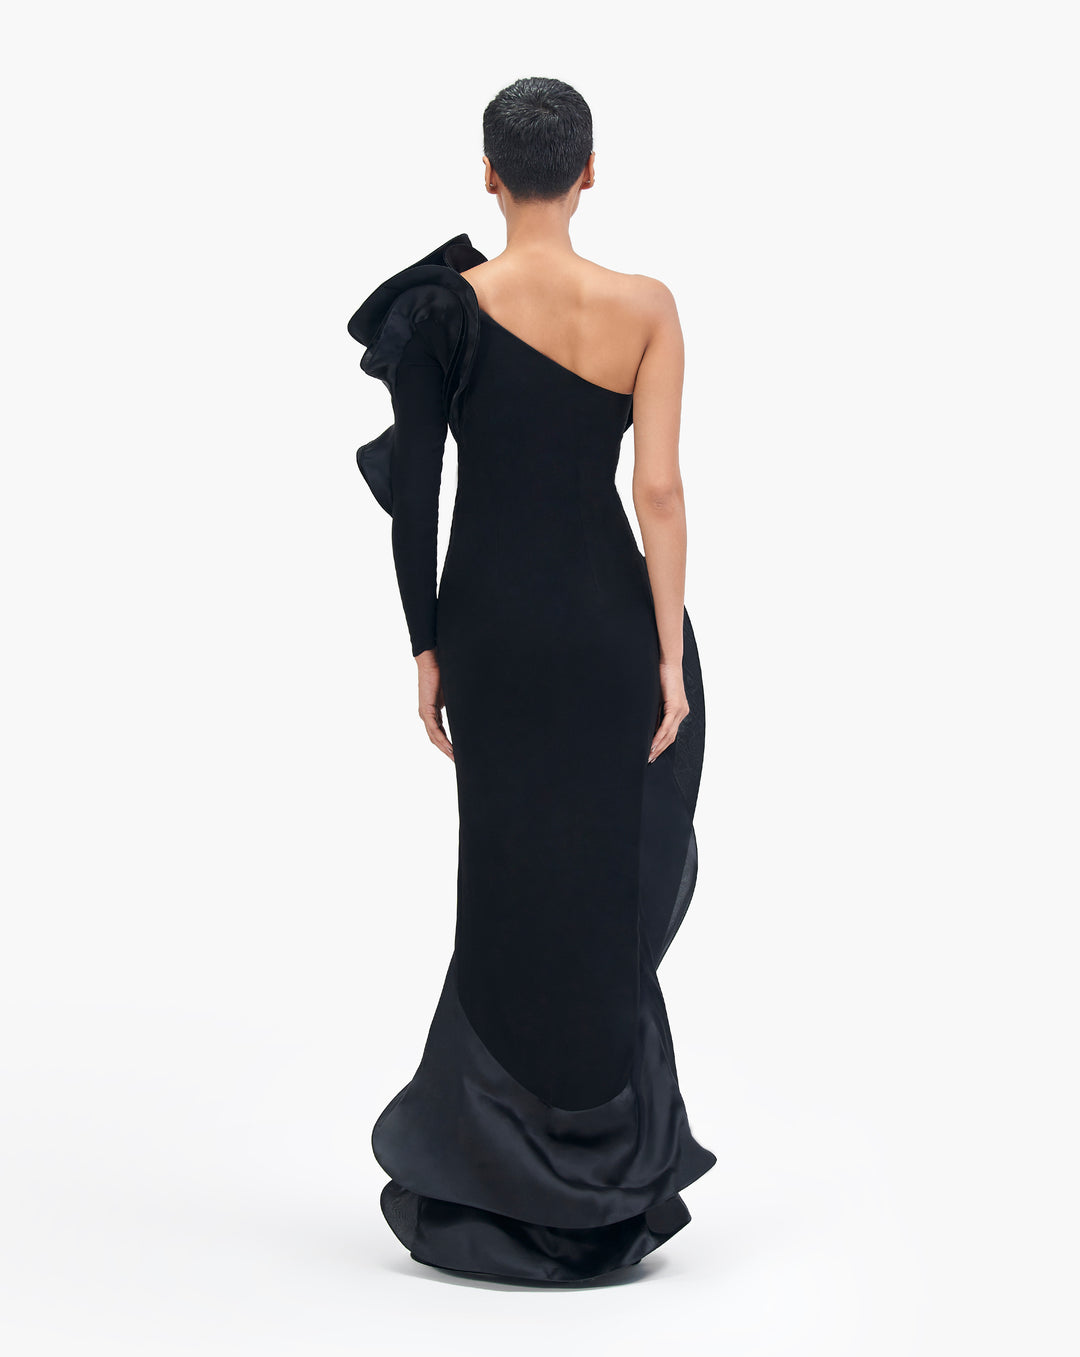 The Ruffled Evening Gown